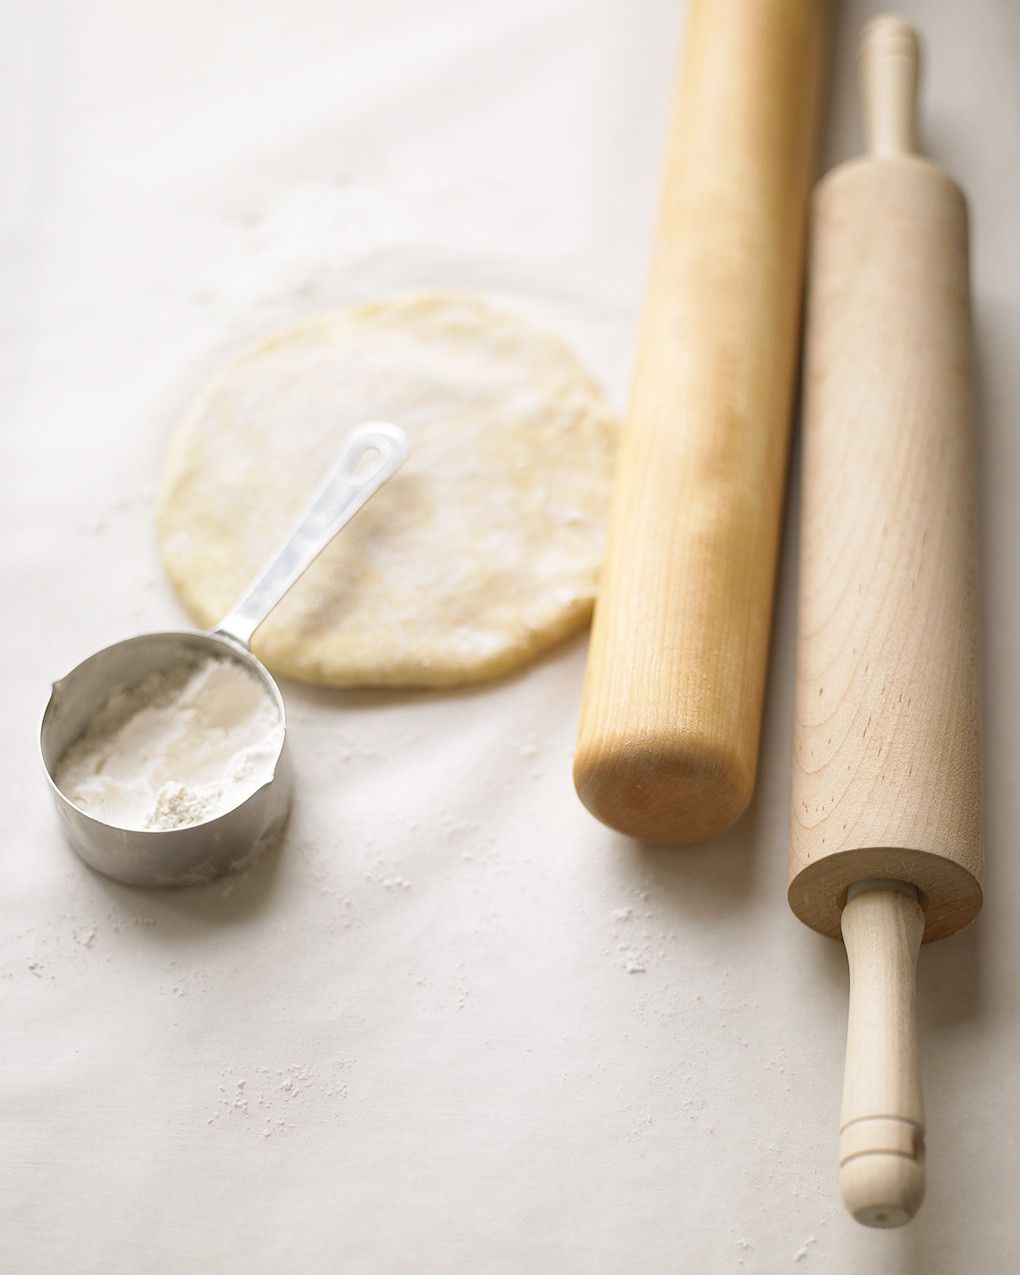 Wooden rolling pins and pie dough on floured surface